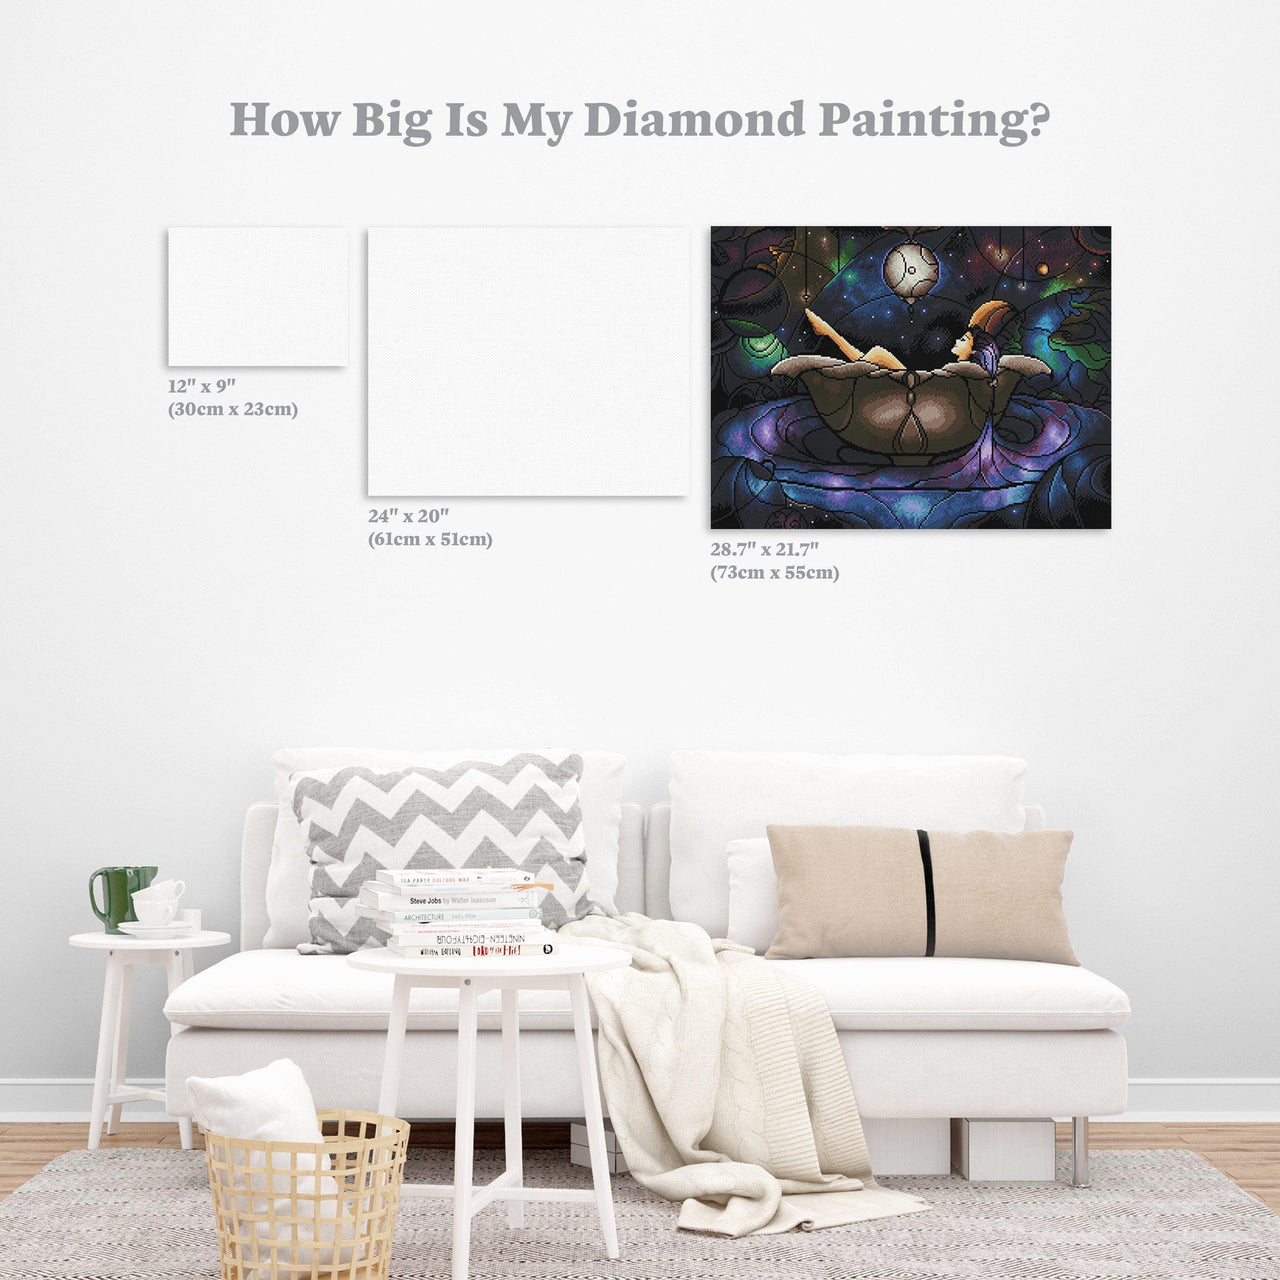 Diamond Painting Worlds Away 21.7" x 28.7" (55cm x 73cm) / Round With 39 Colors Including 2 ABs / 50,314